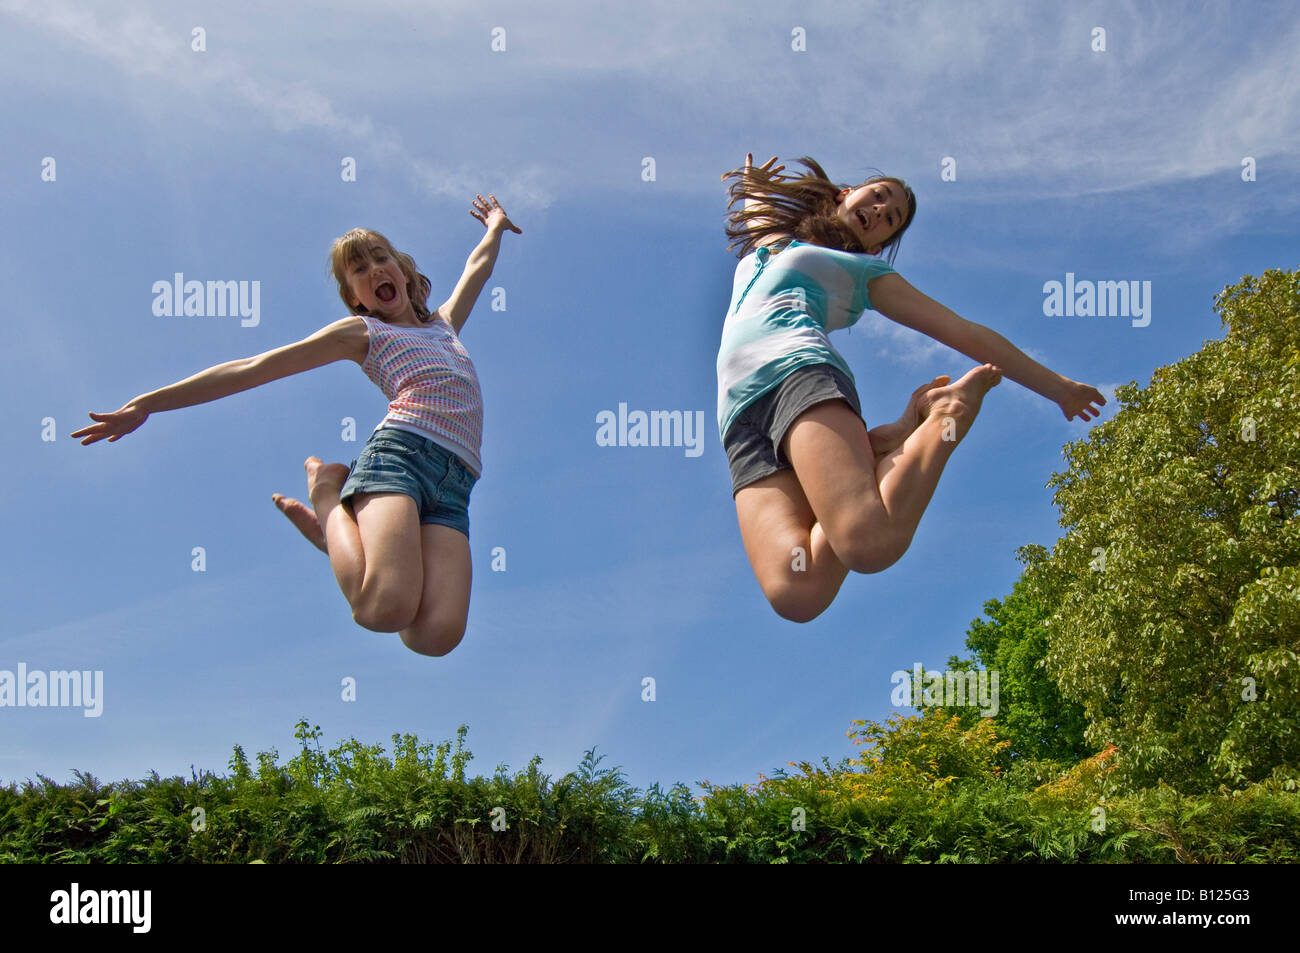 Two young girls (10 and 13 yrs) jumping from a trampoline in mid air on a bright sunny day. Stock Photo